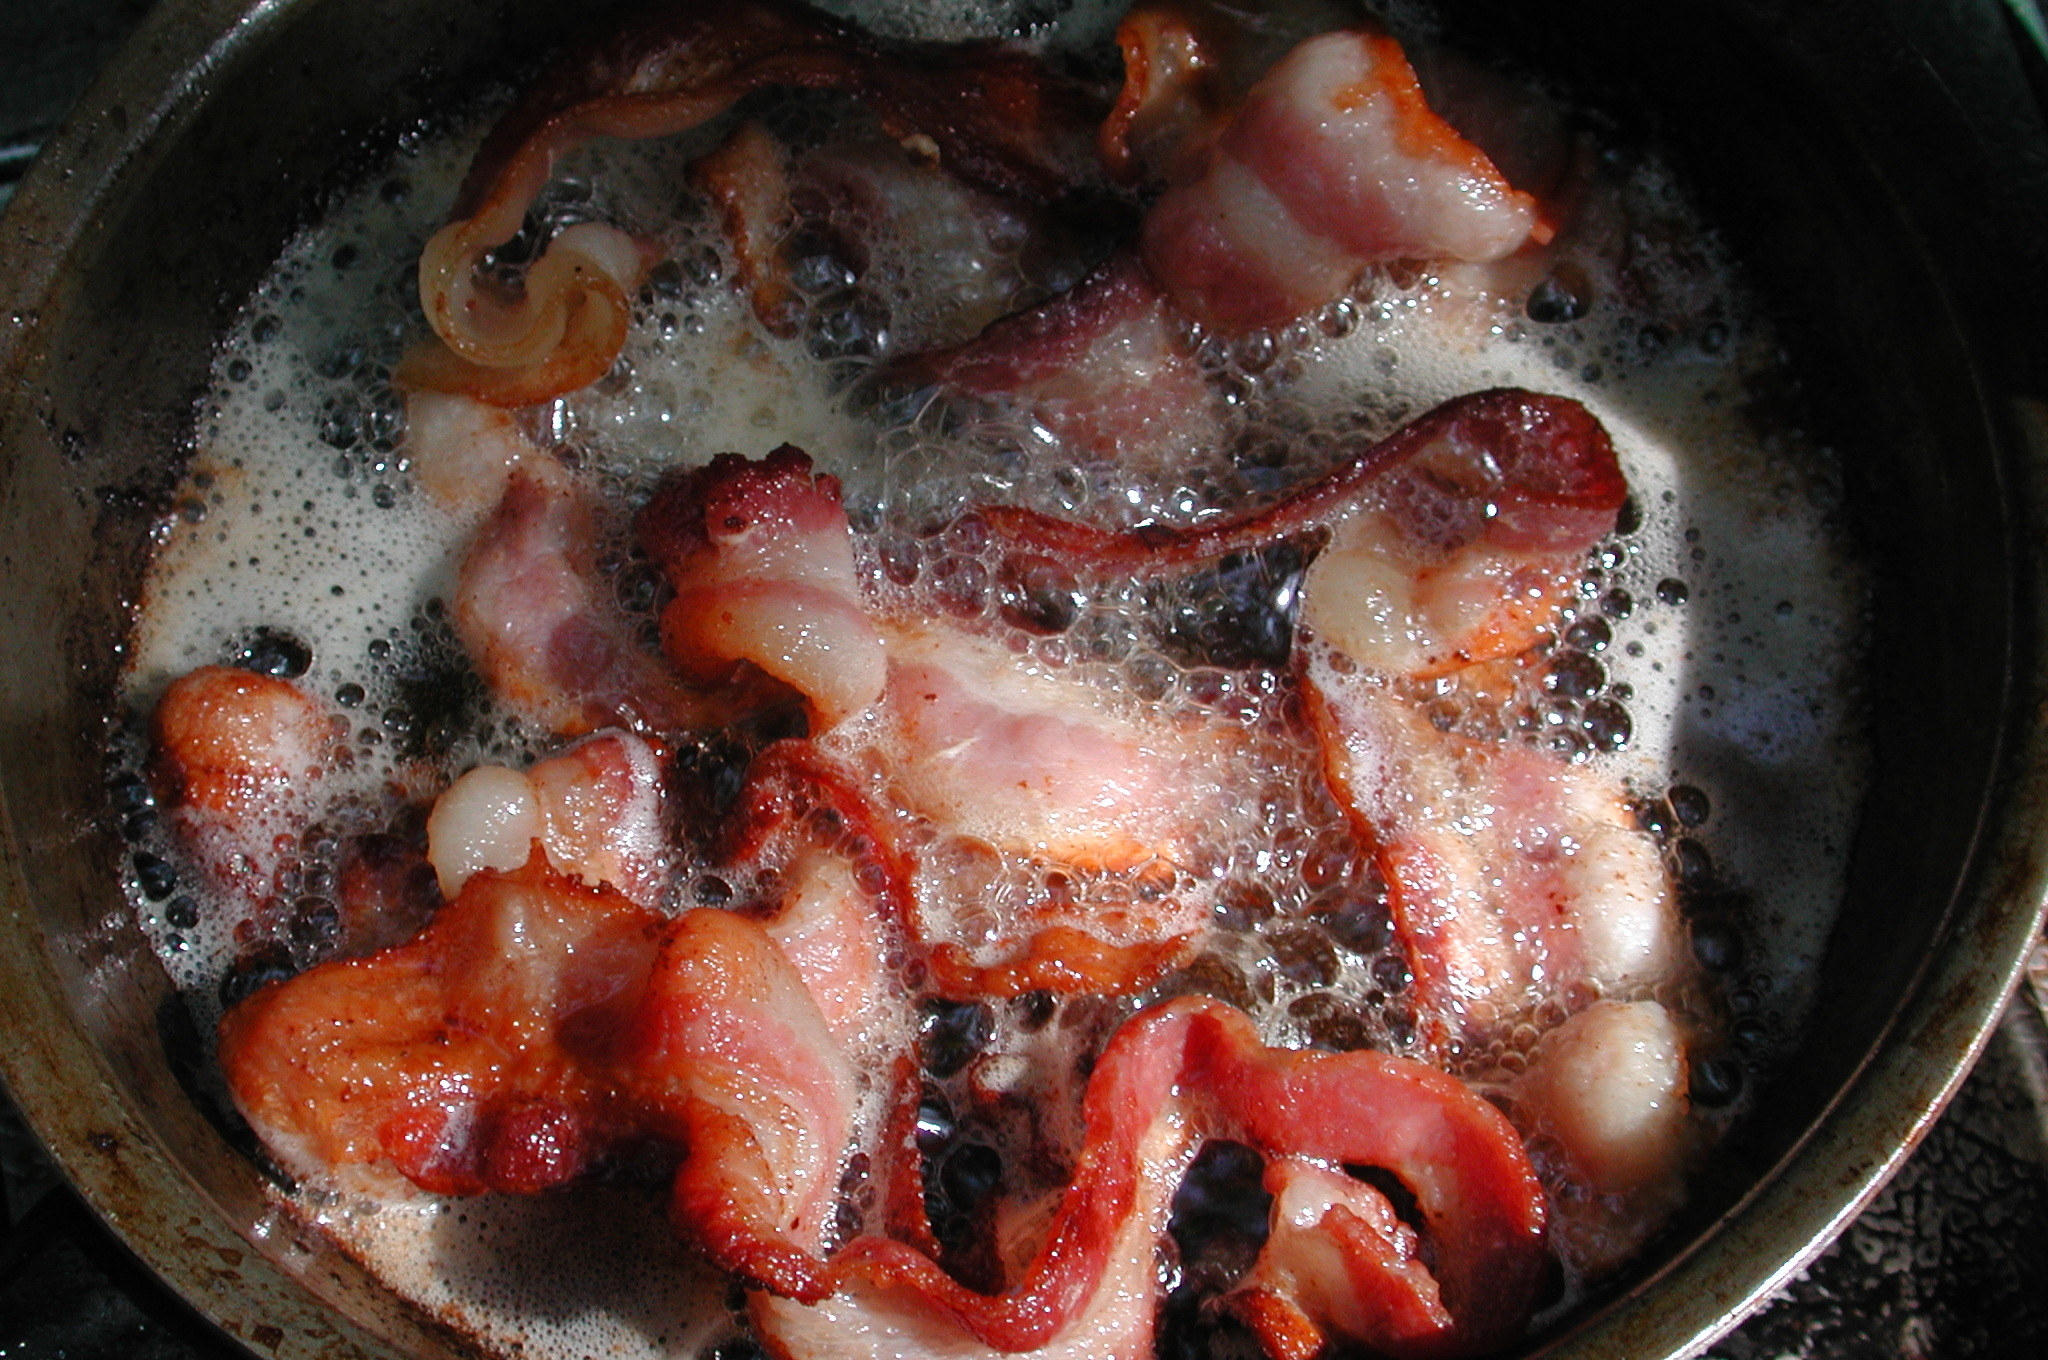 Bacon sizzling in its fat.